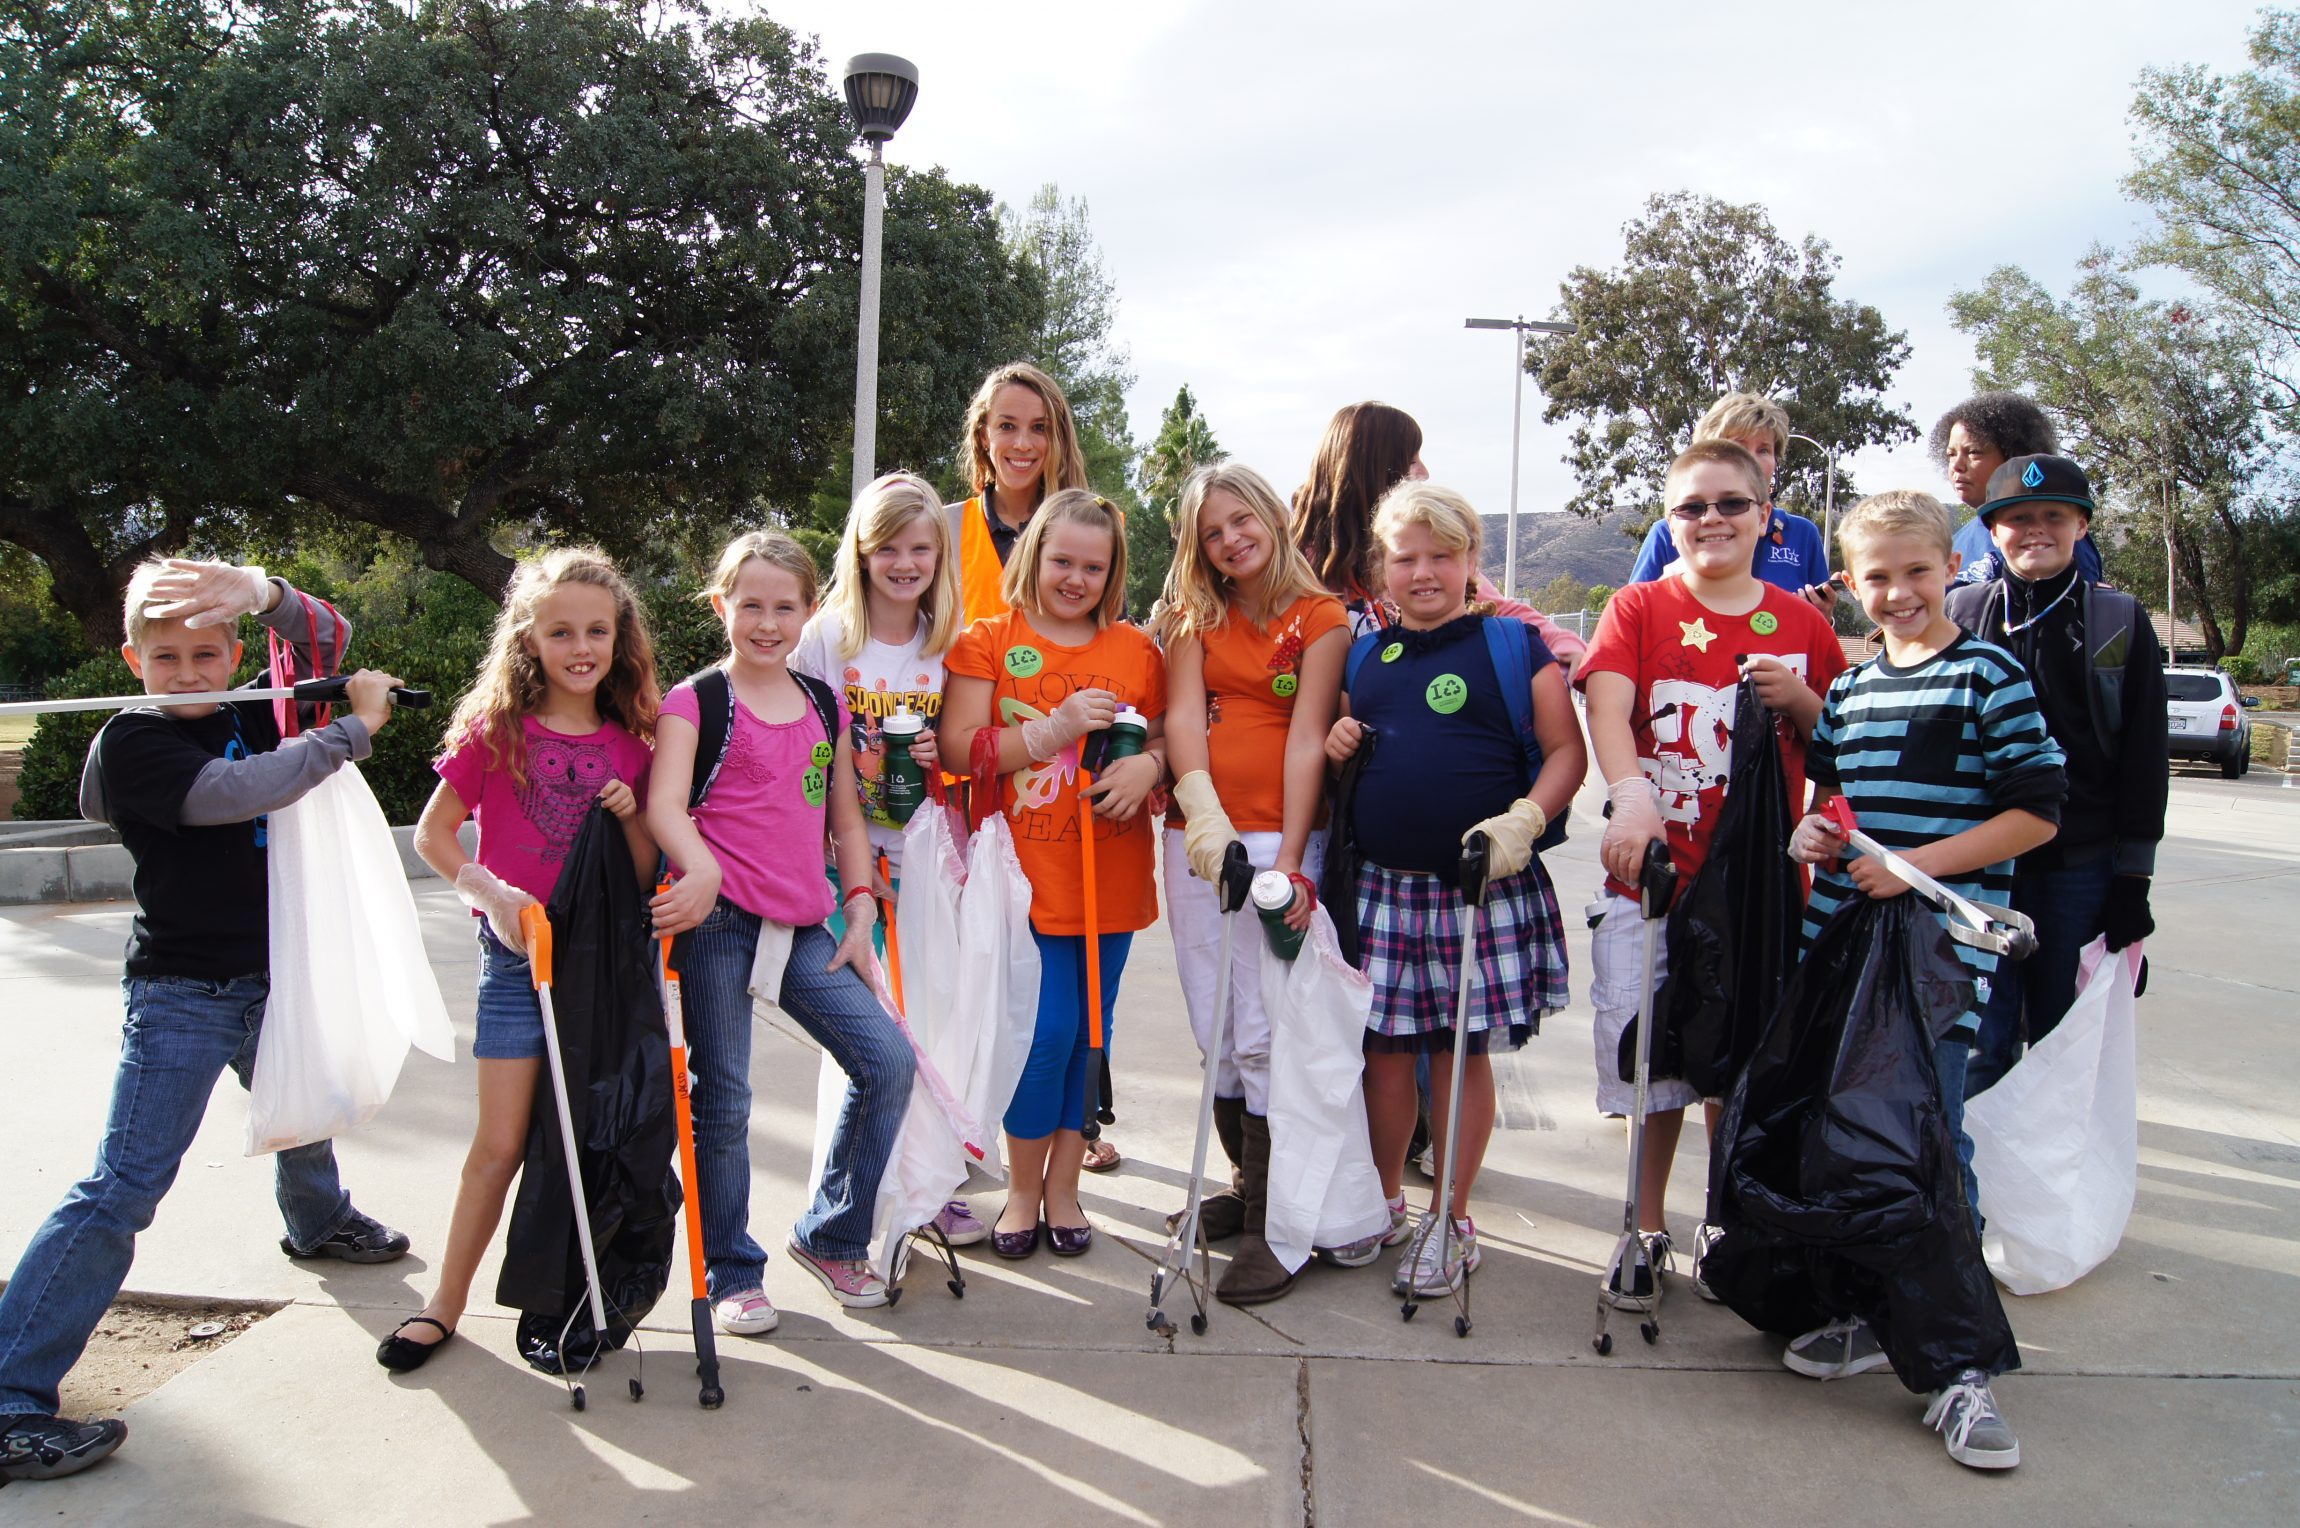 At the end of the day, students did a cleanup, picking up trash and recyclables near their school.